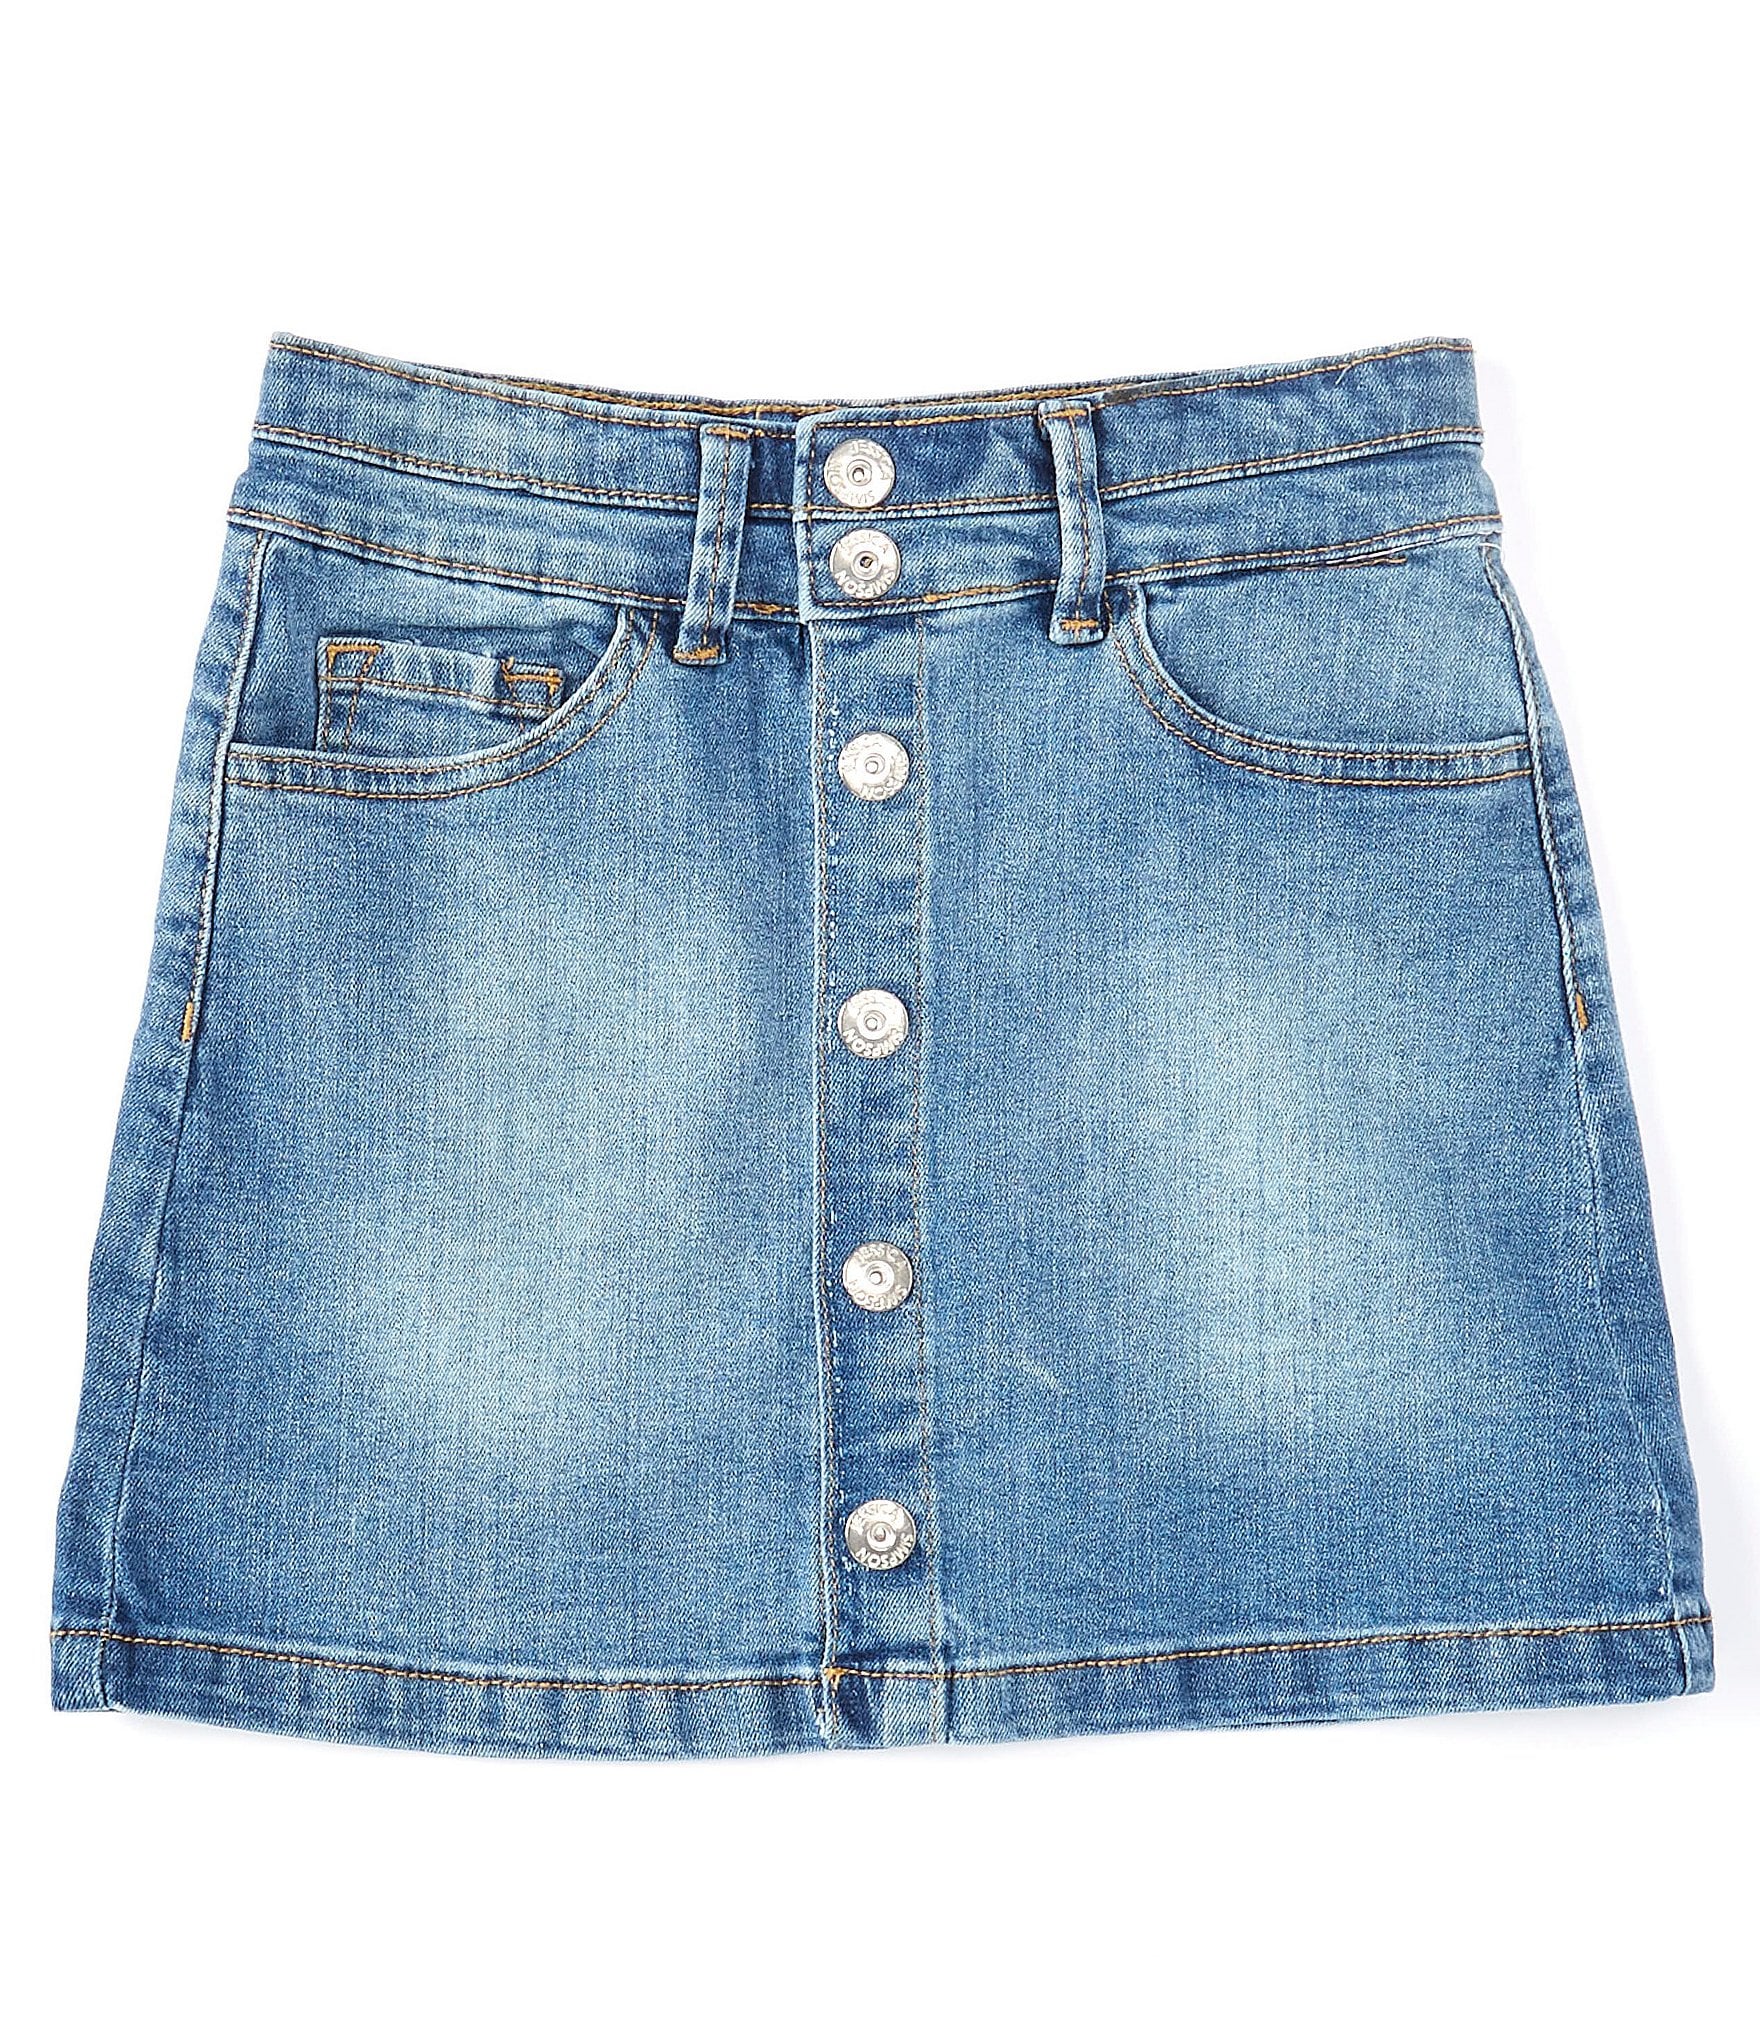 Blue Jean Skirts For Toddlers | lupon.gov.ph